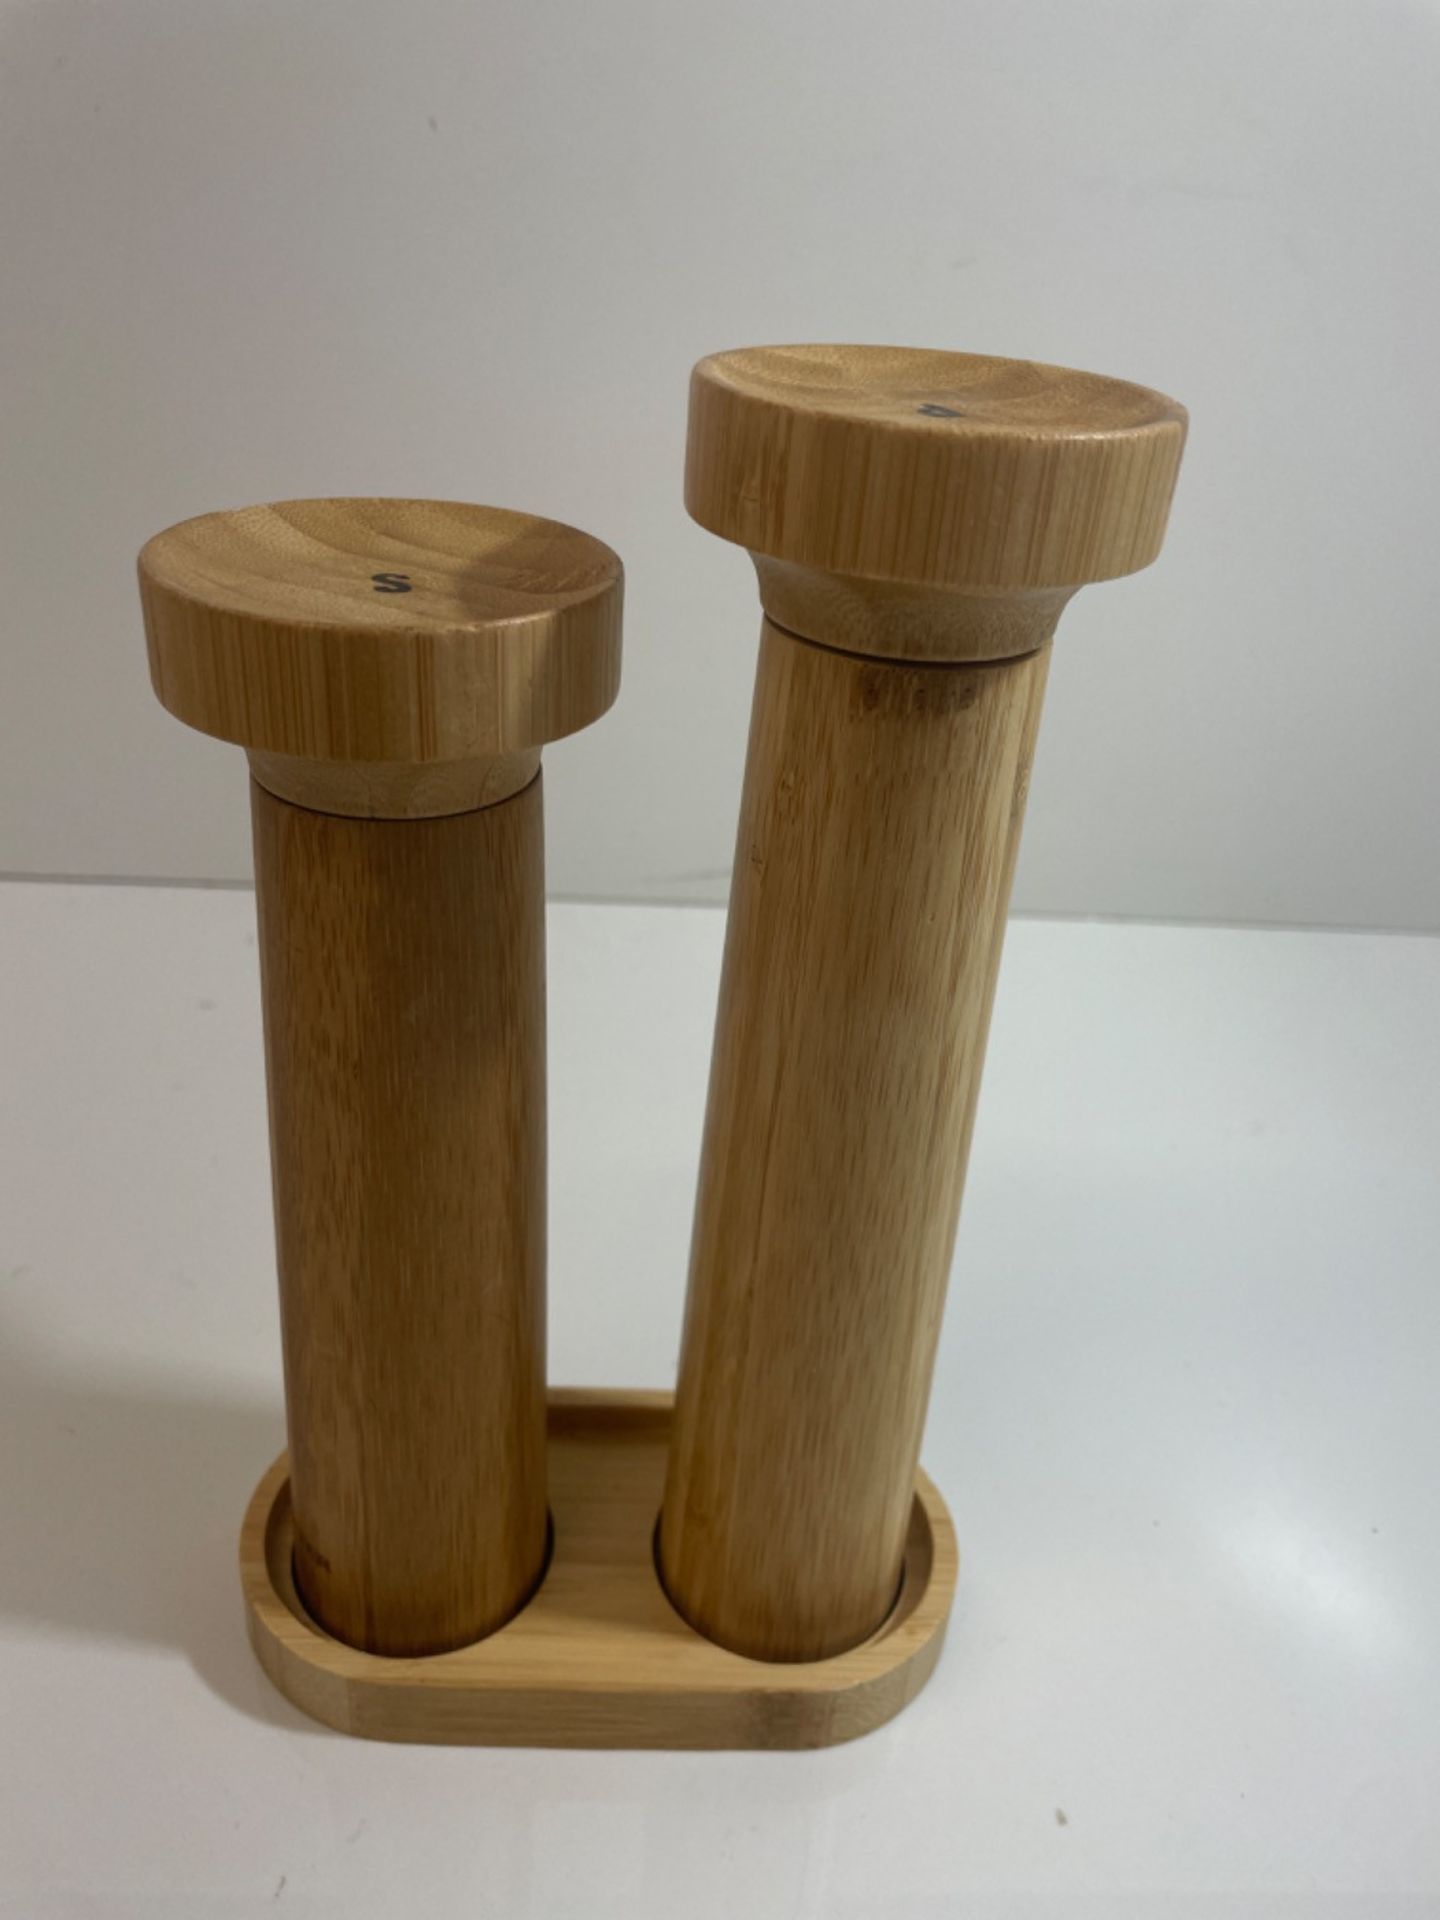 Salter 7614 WDXR Eco Bamboo Salt & Pepper Grinder Set - Solid Bamboo Mills With Stand, Manual Twi... - Image 2 of 3